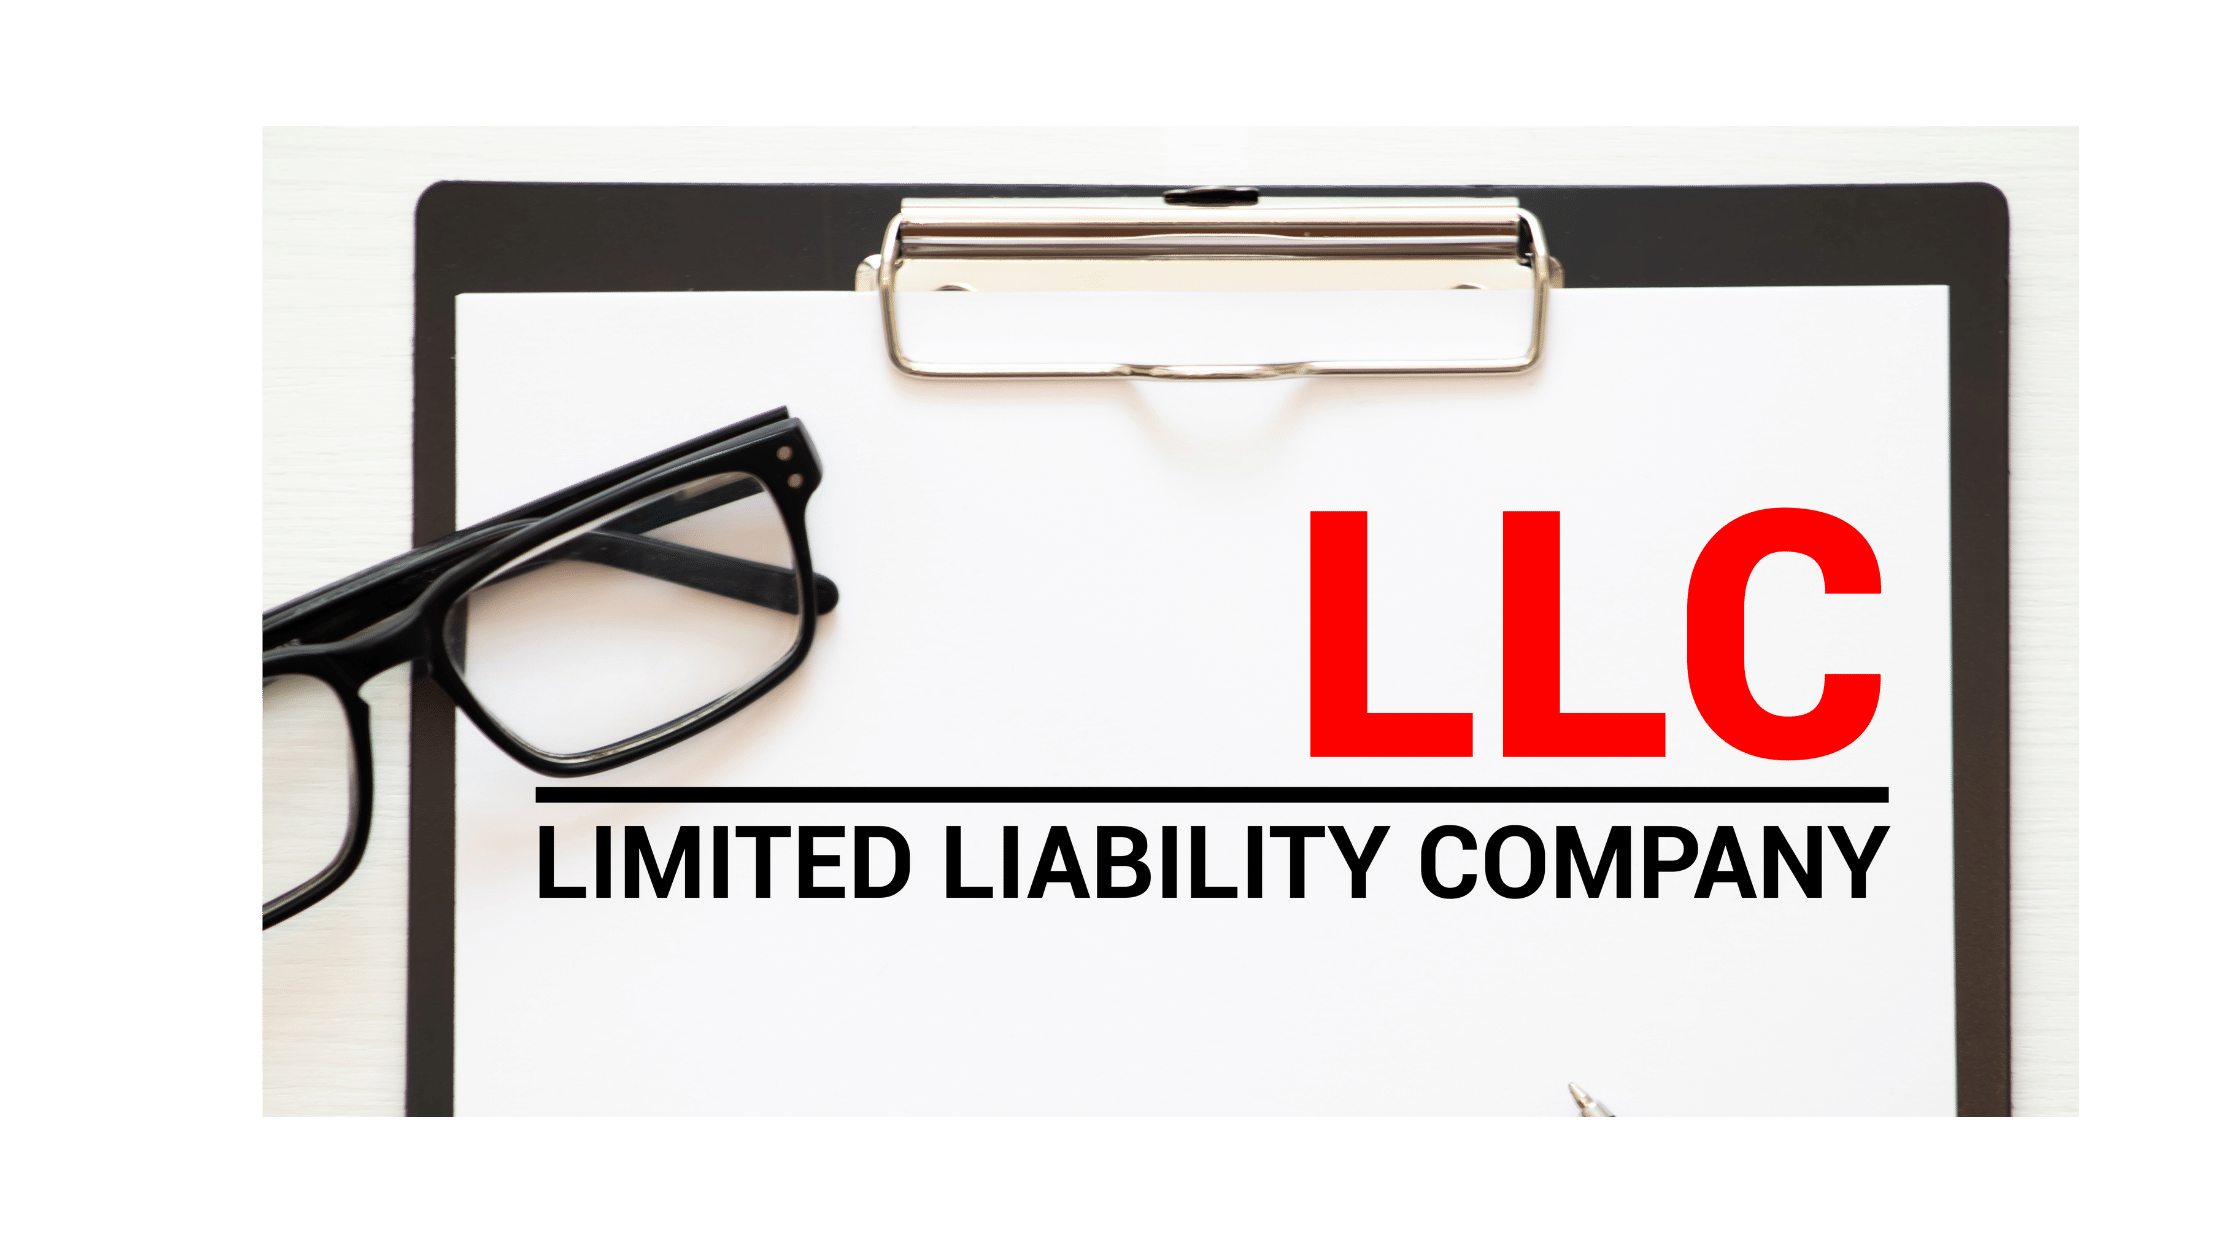 Can You Engage in Multiple Activities Under a Single Company LLC?